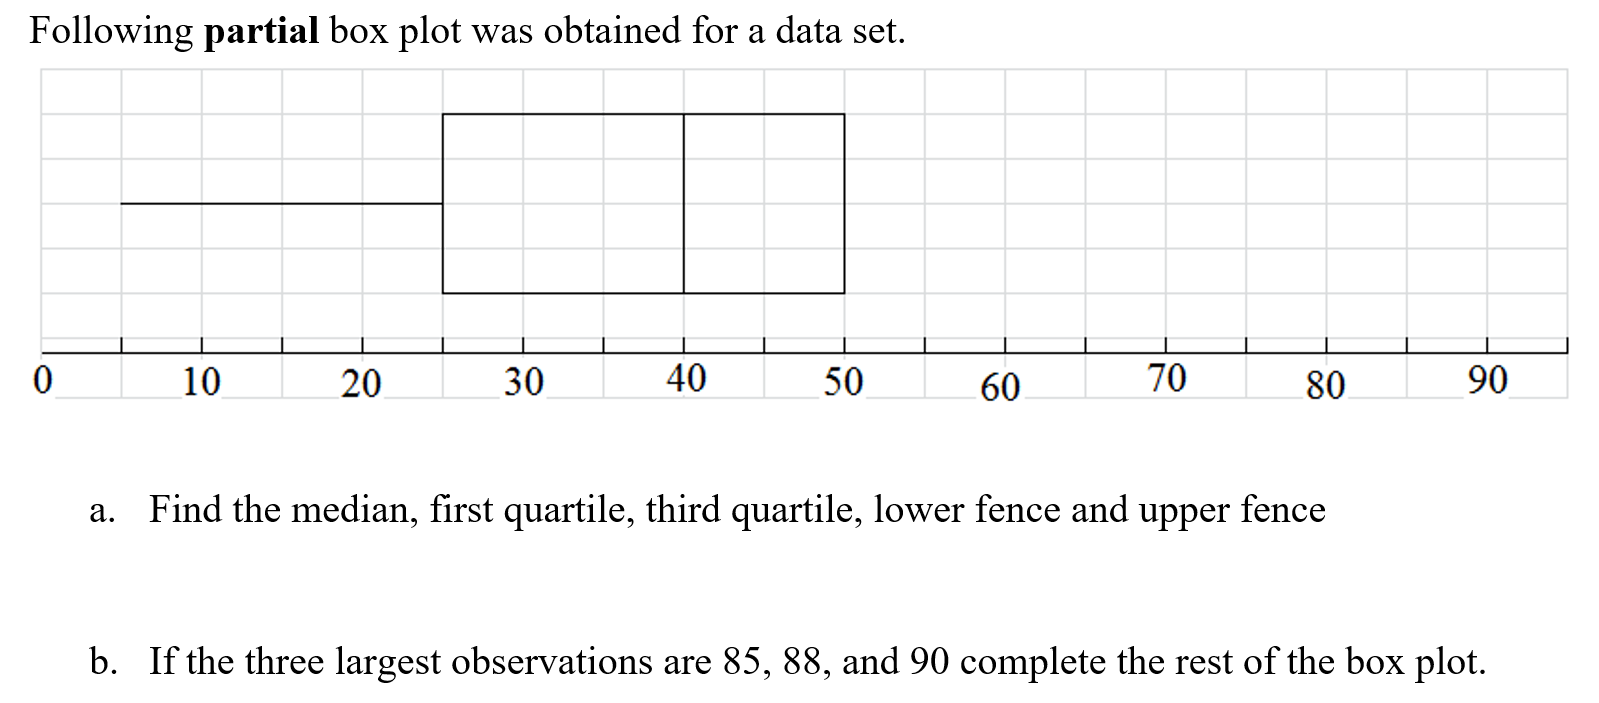 Following partial box plot
was obtained for a data set.
